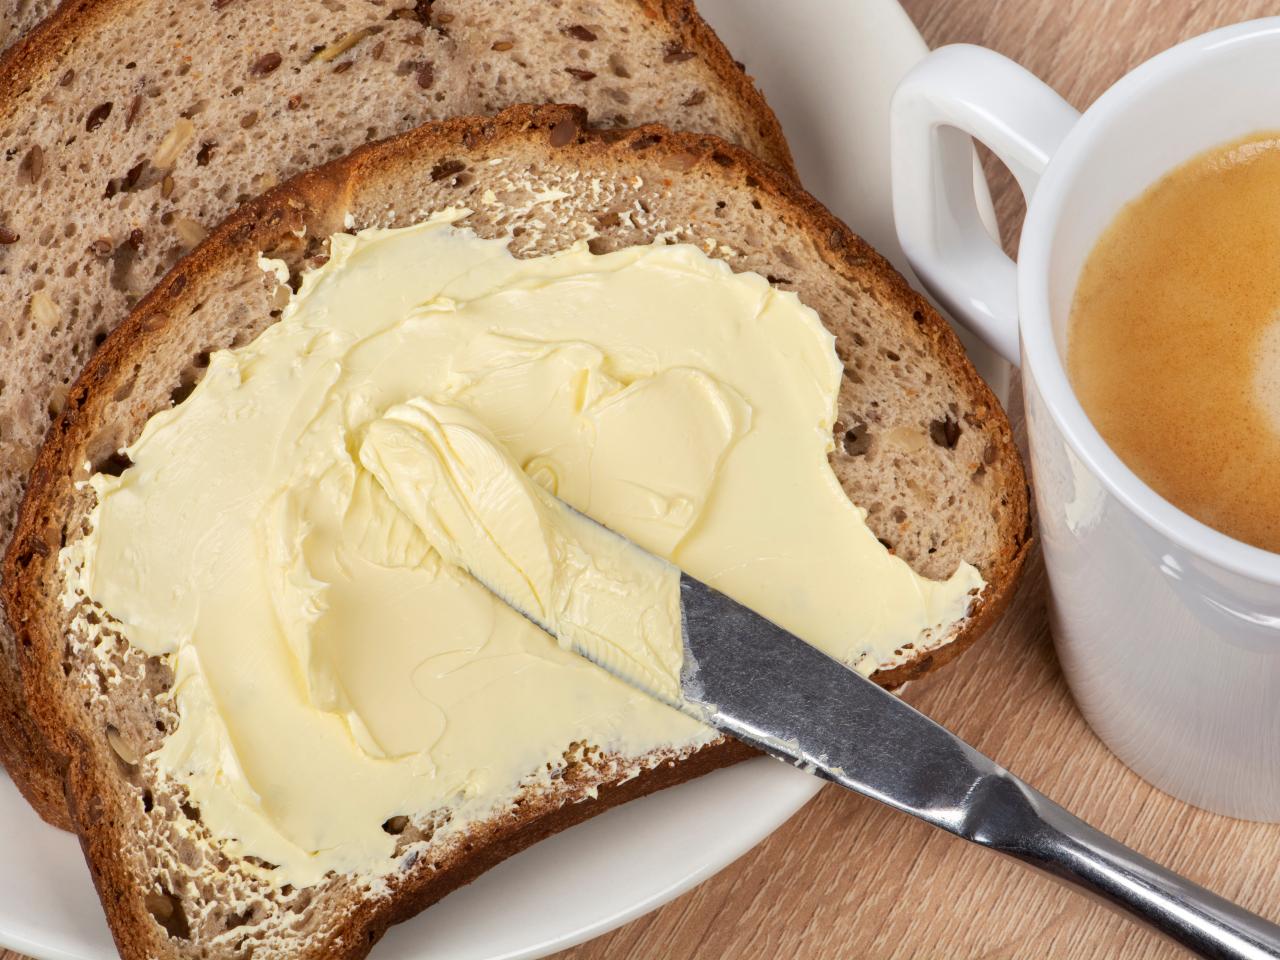 https://food.fnr.sndimg.com/content/dam/images/food/fullset/2023/7/20/knife-spreading-butter-on-bread-on-plate-with-tea-on-side.jpg.rend.hgtvcom.1280.960.suffix/1689872417728.jpeg